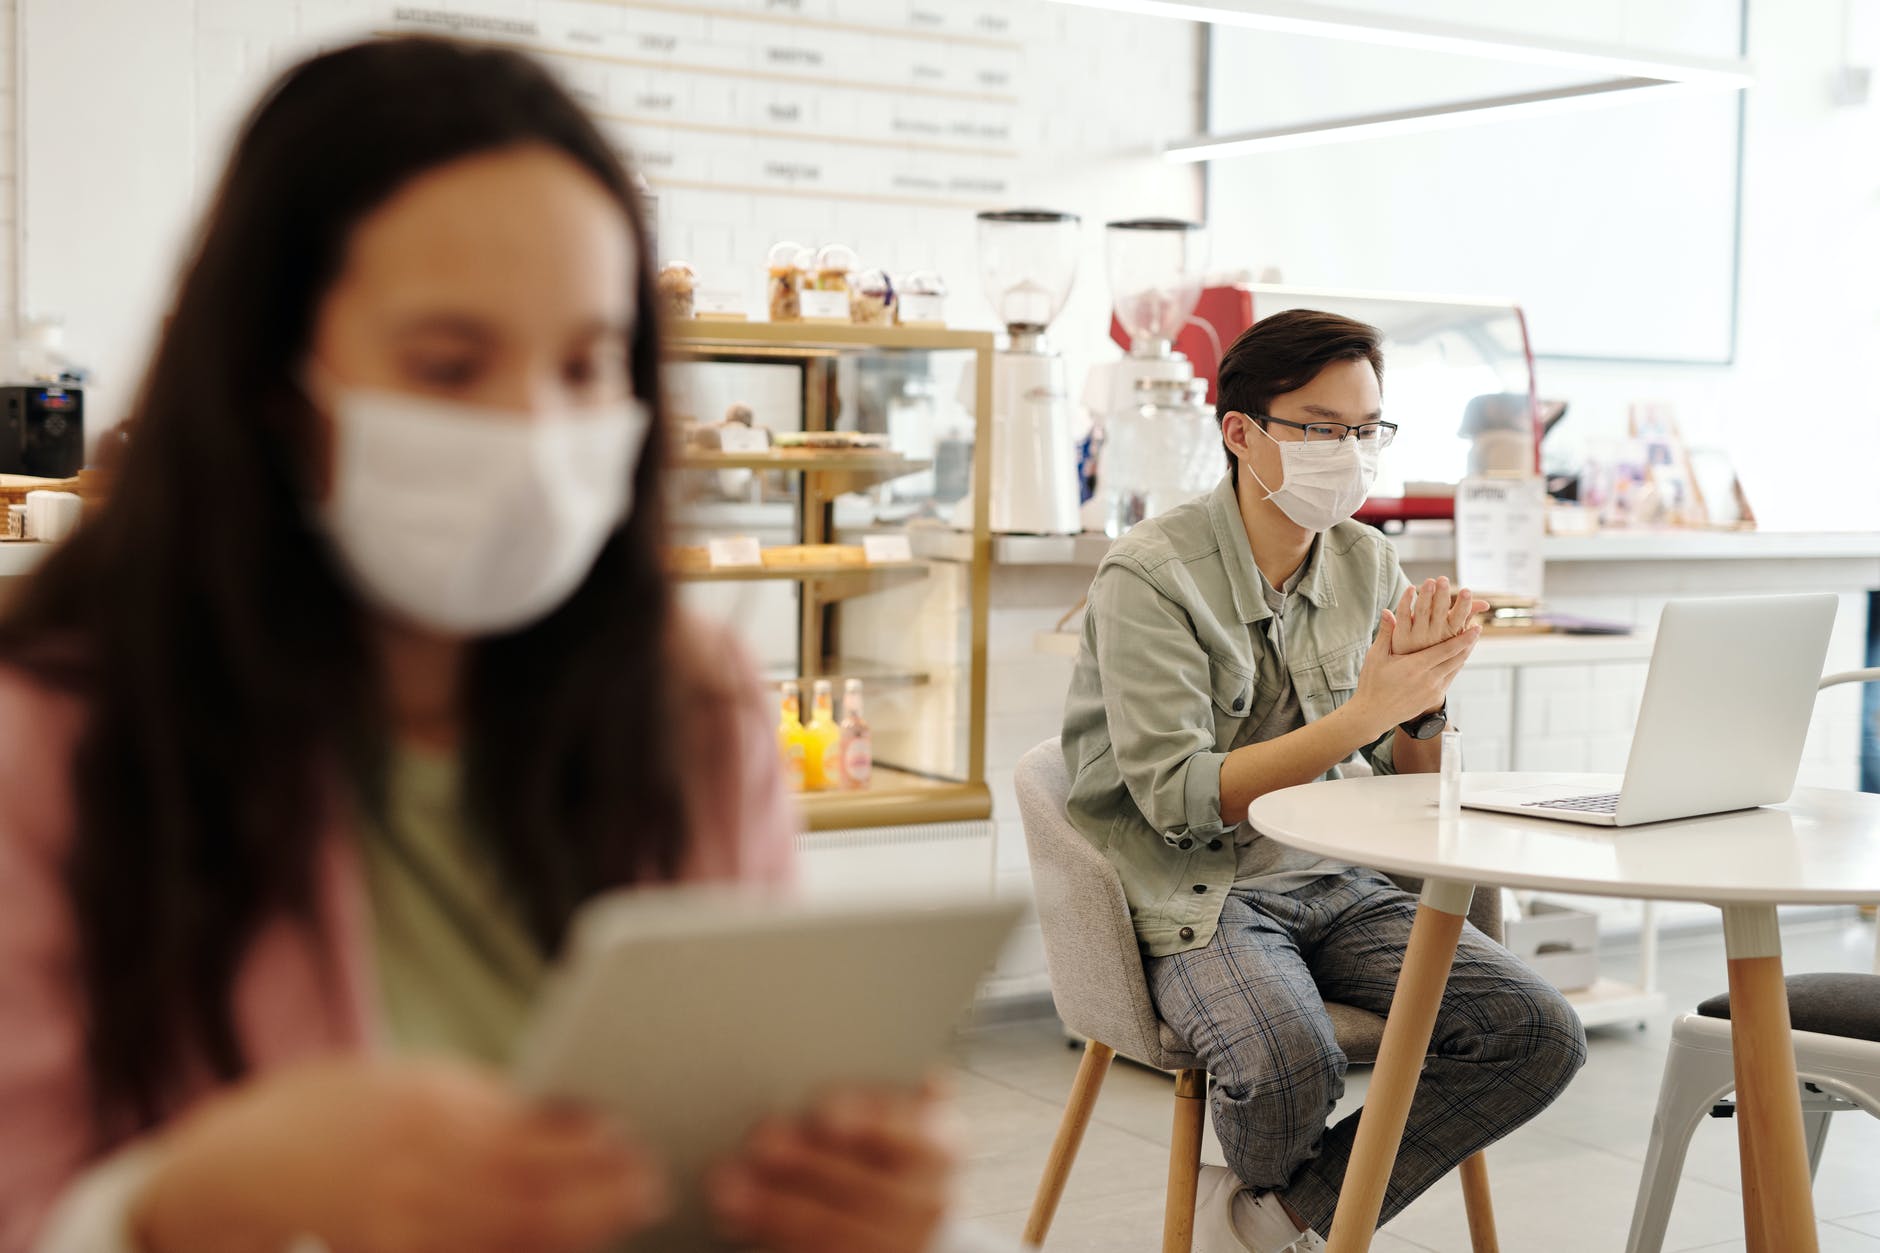 Photos of students sitting in a coffeeshop while wearing facemasks.